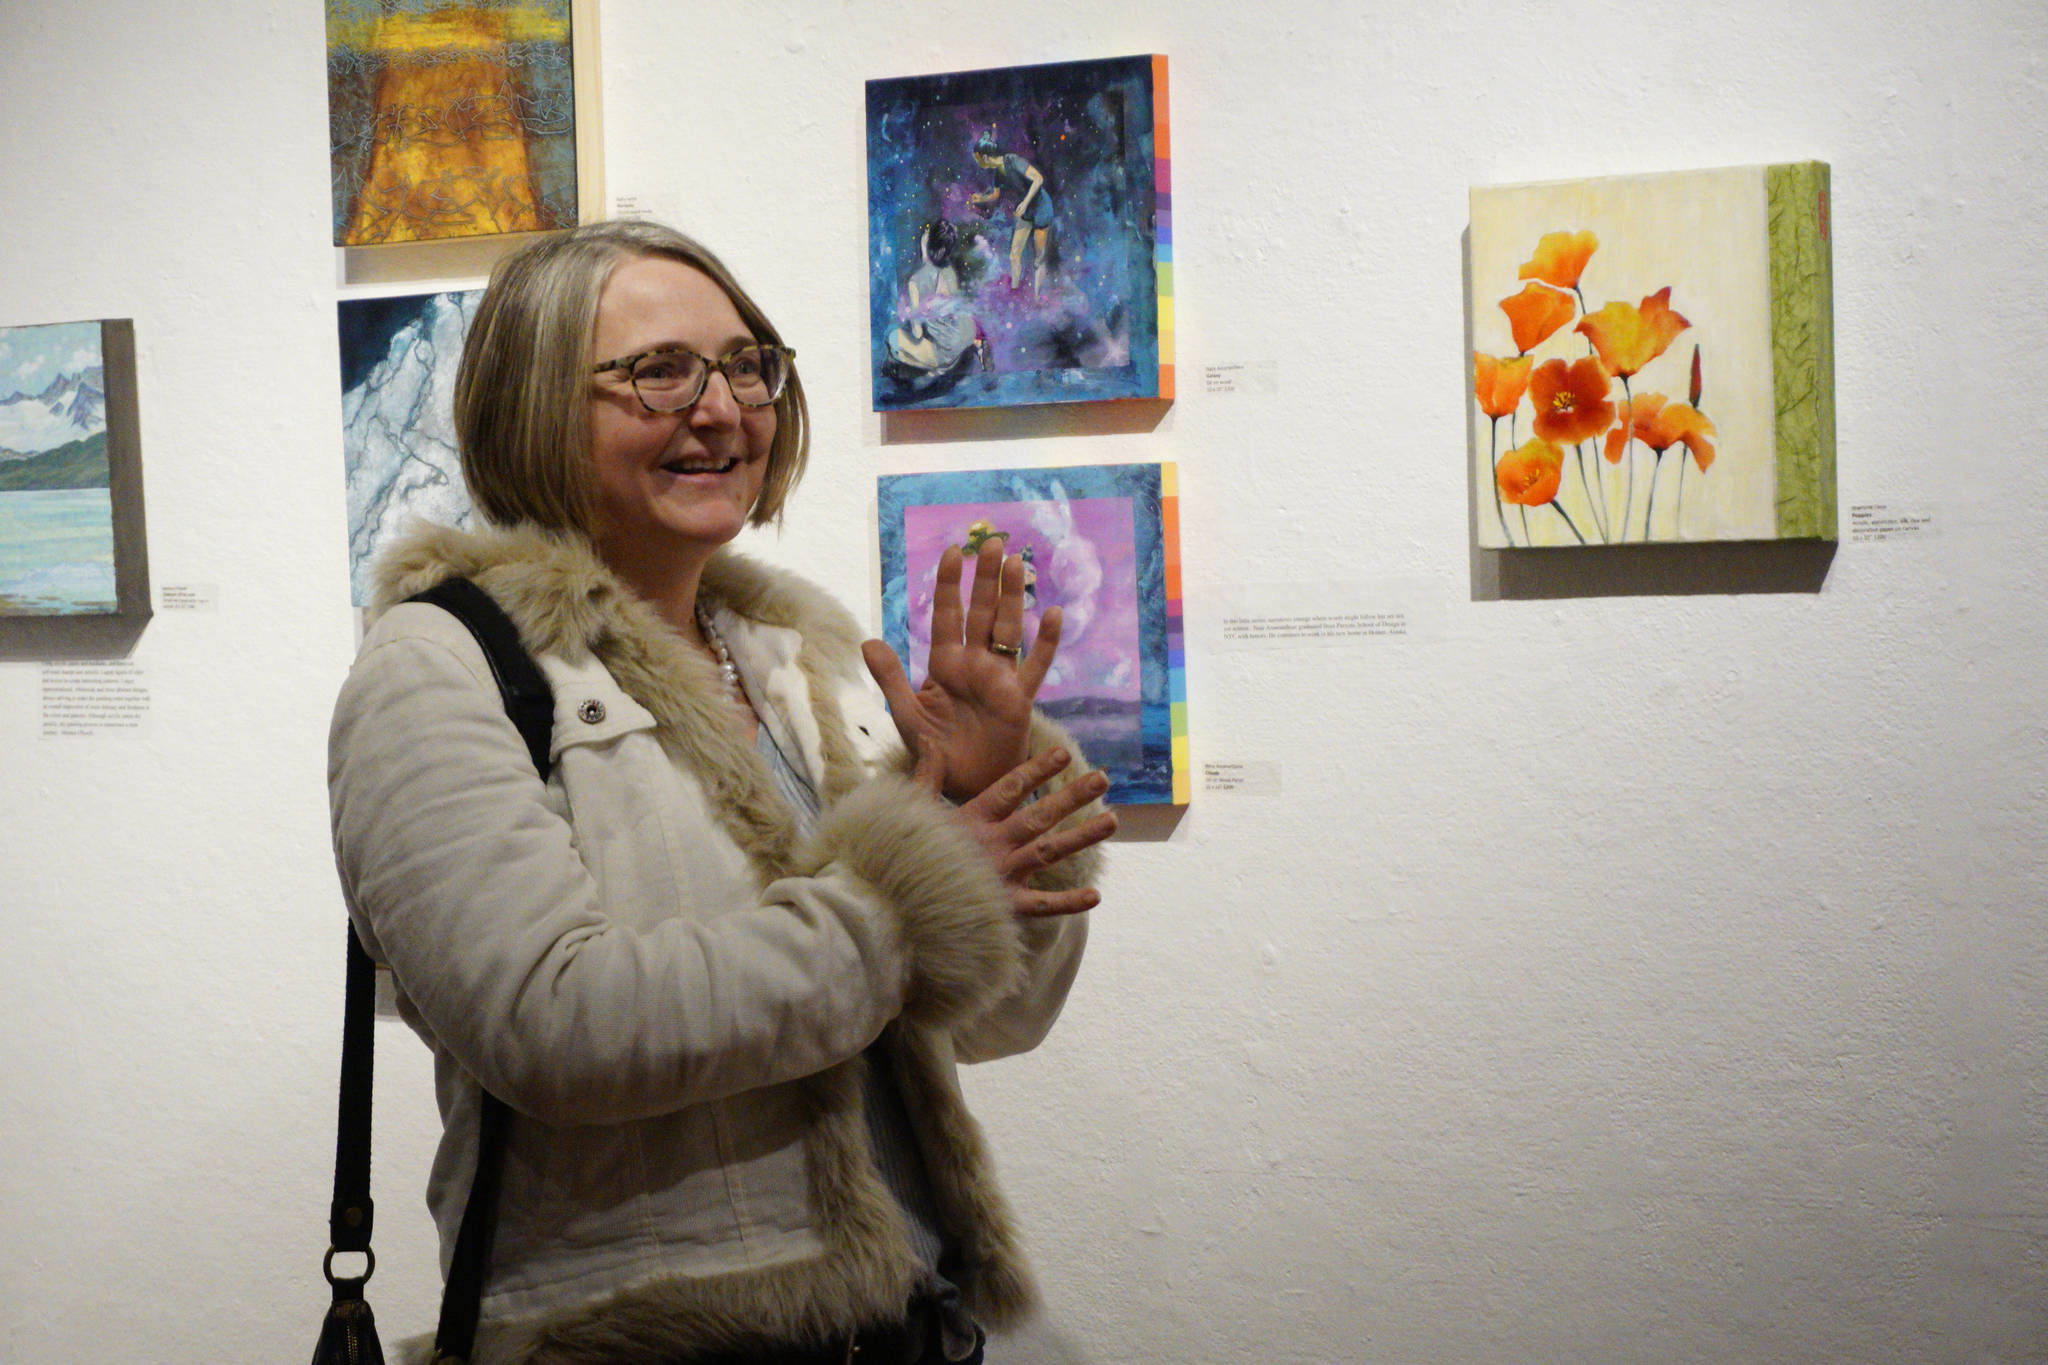 Sharlene Cline talks about her painting, “Poppies,” at the First Friday, Dec 7, 2018, opening of Bunnell Street Arts Center’s 10x10 show in Homer, Alaska. (Photo by Michael Armstrong/Homer News)